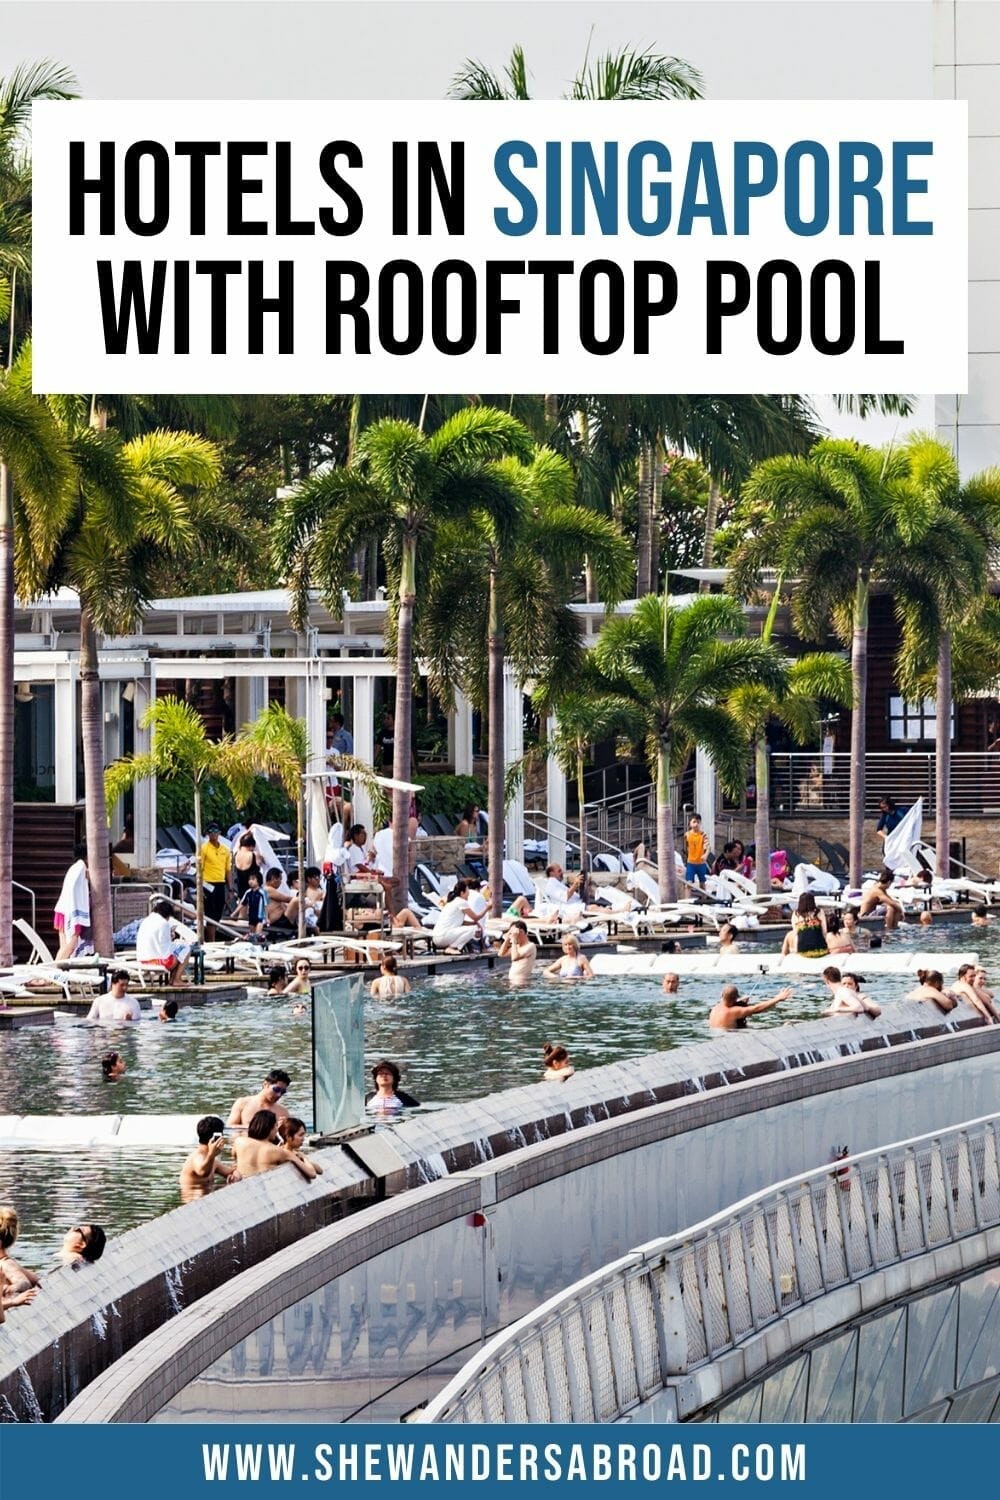 15 Stunning Hotels in Singapore with Rooftop Pools